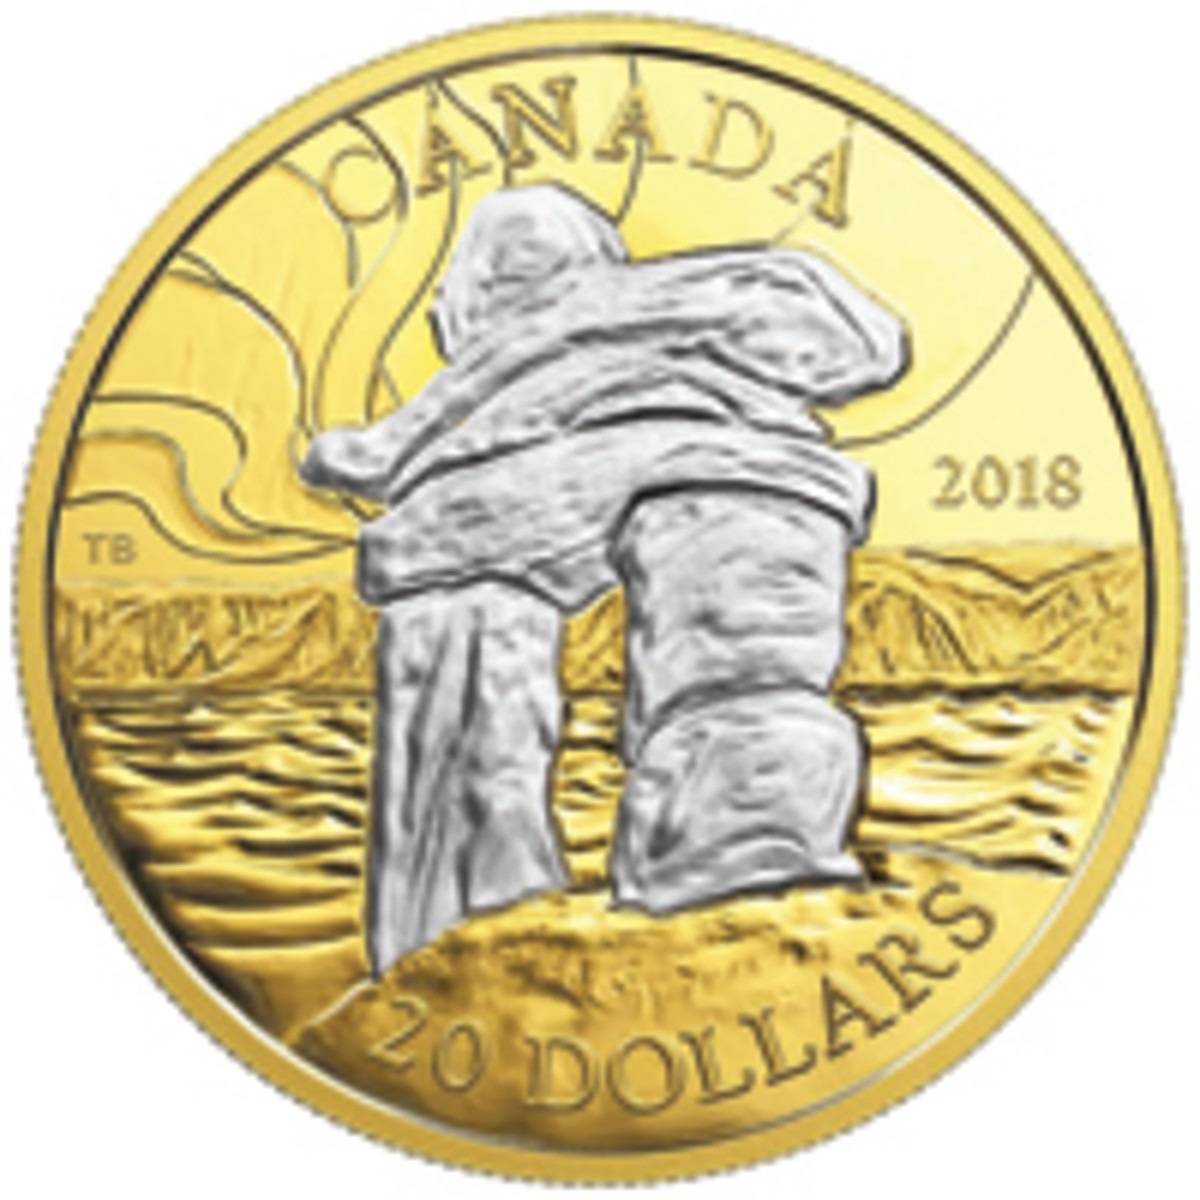  Canada is issuing a gold-plated silver $20 coin. Are plated rather than pure gold coins becoming a trend?